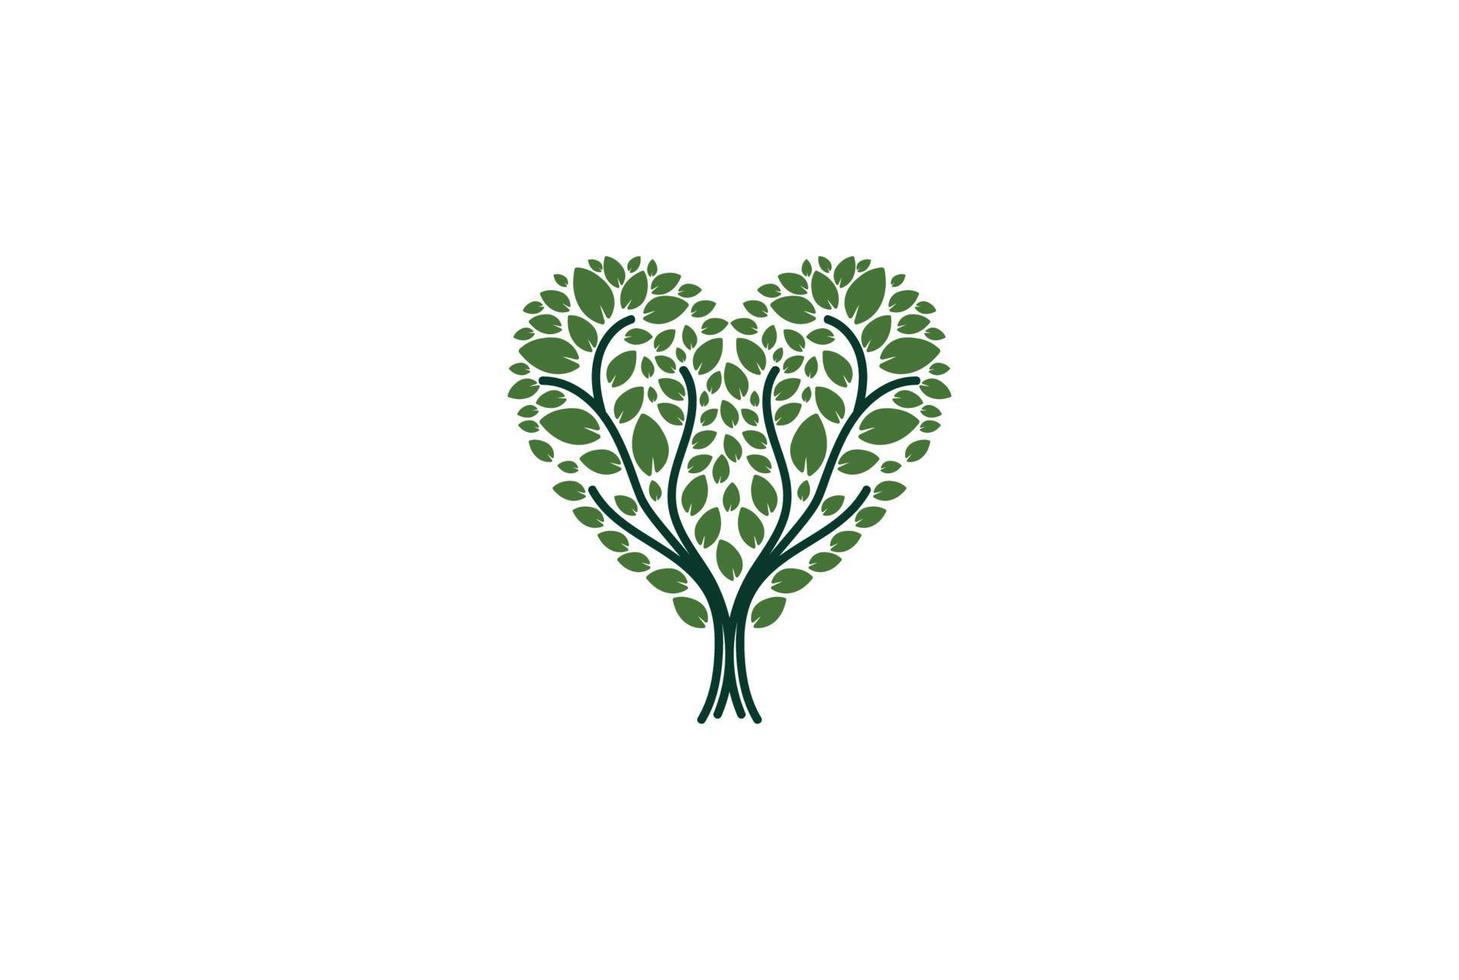 Heart Love Tree of Life for Education Charity Foundation Logo Design Vector